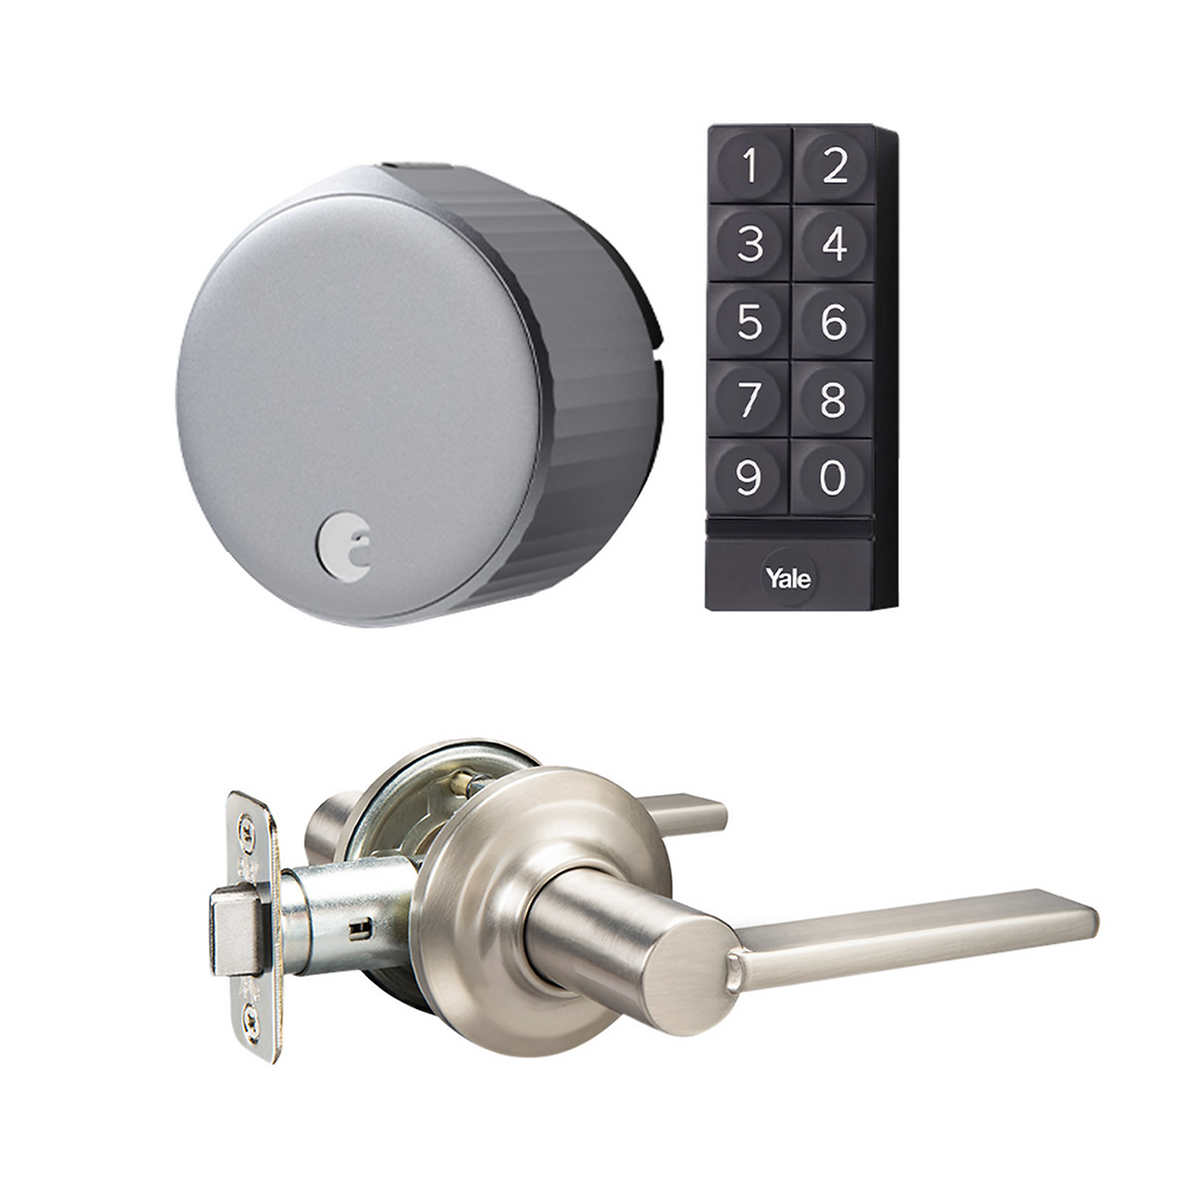 Costco: August Wi-Fi Smart Lock With Yale Keypad and Satin Nickel Door Lever $149.97